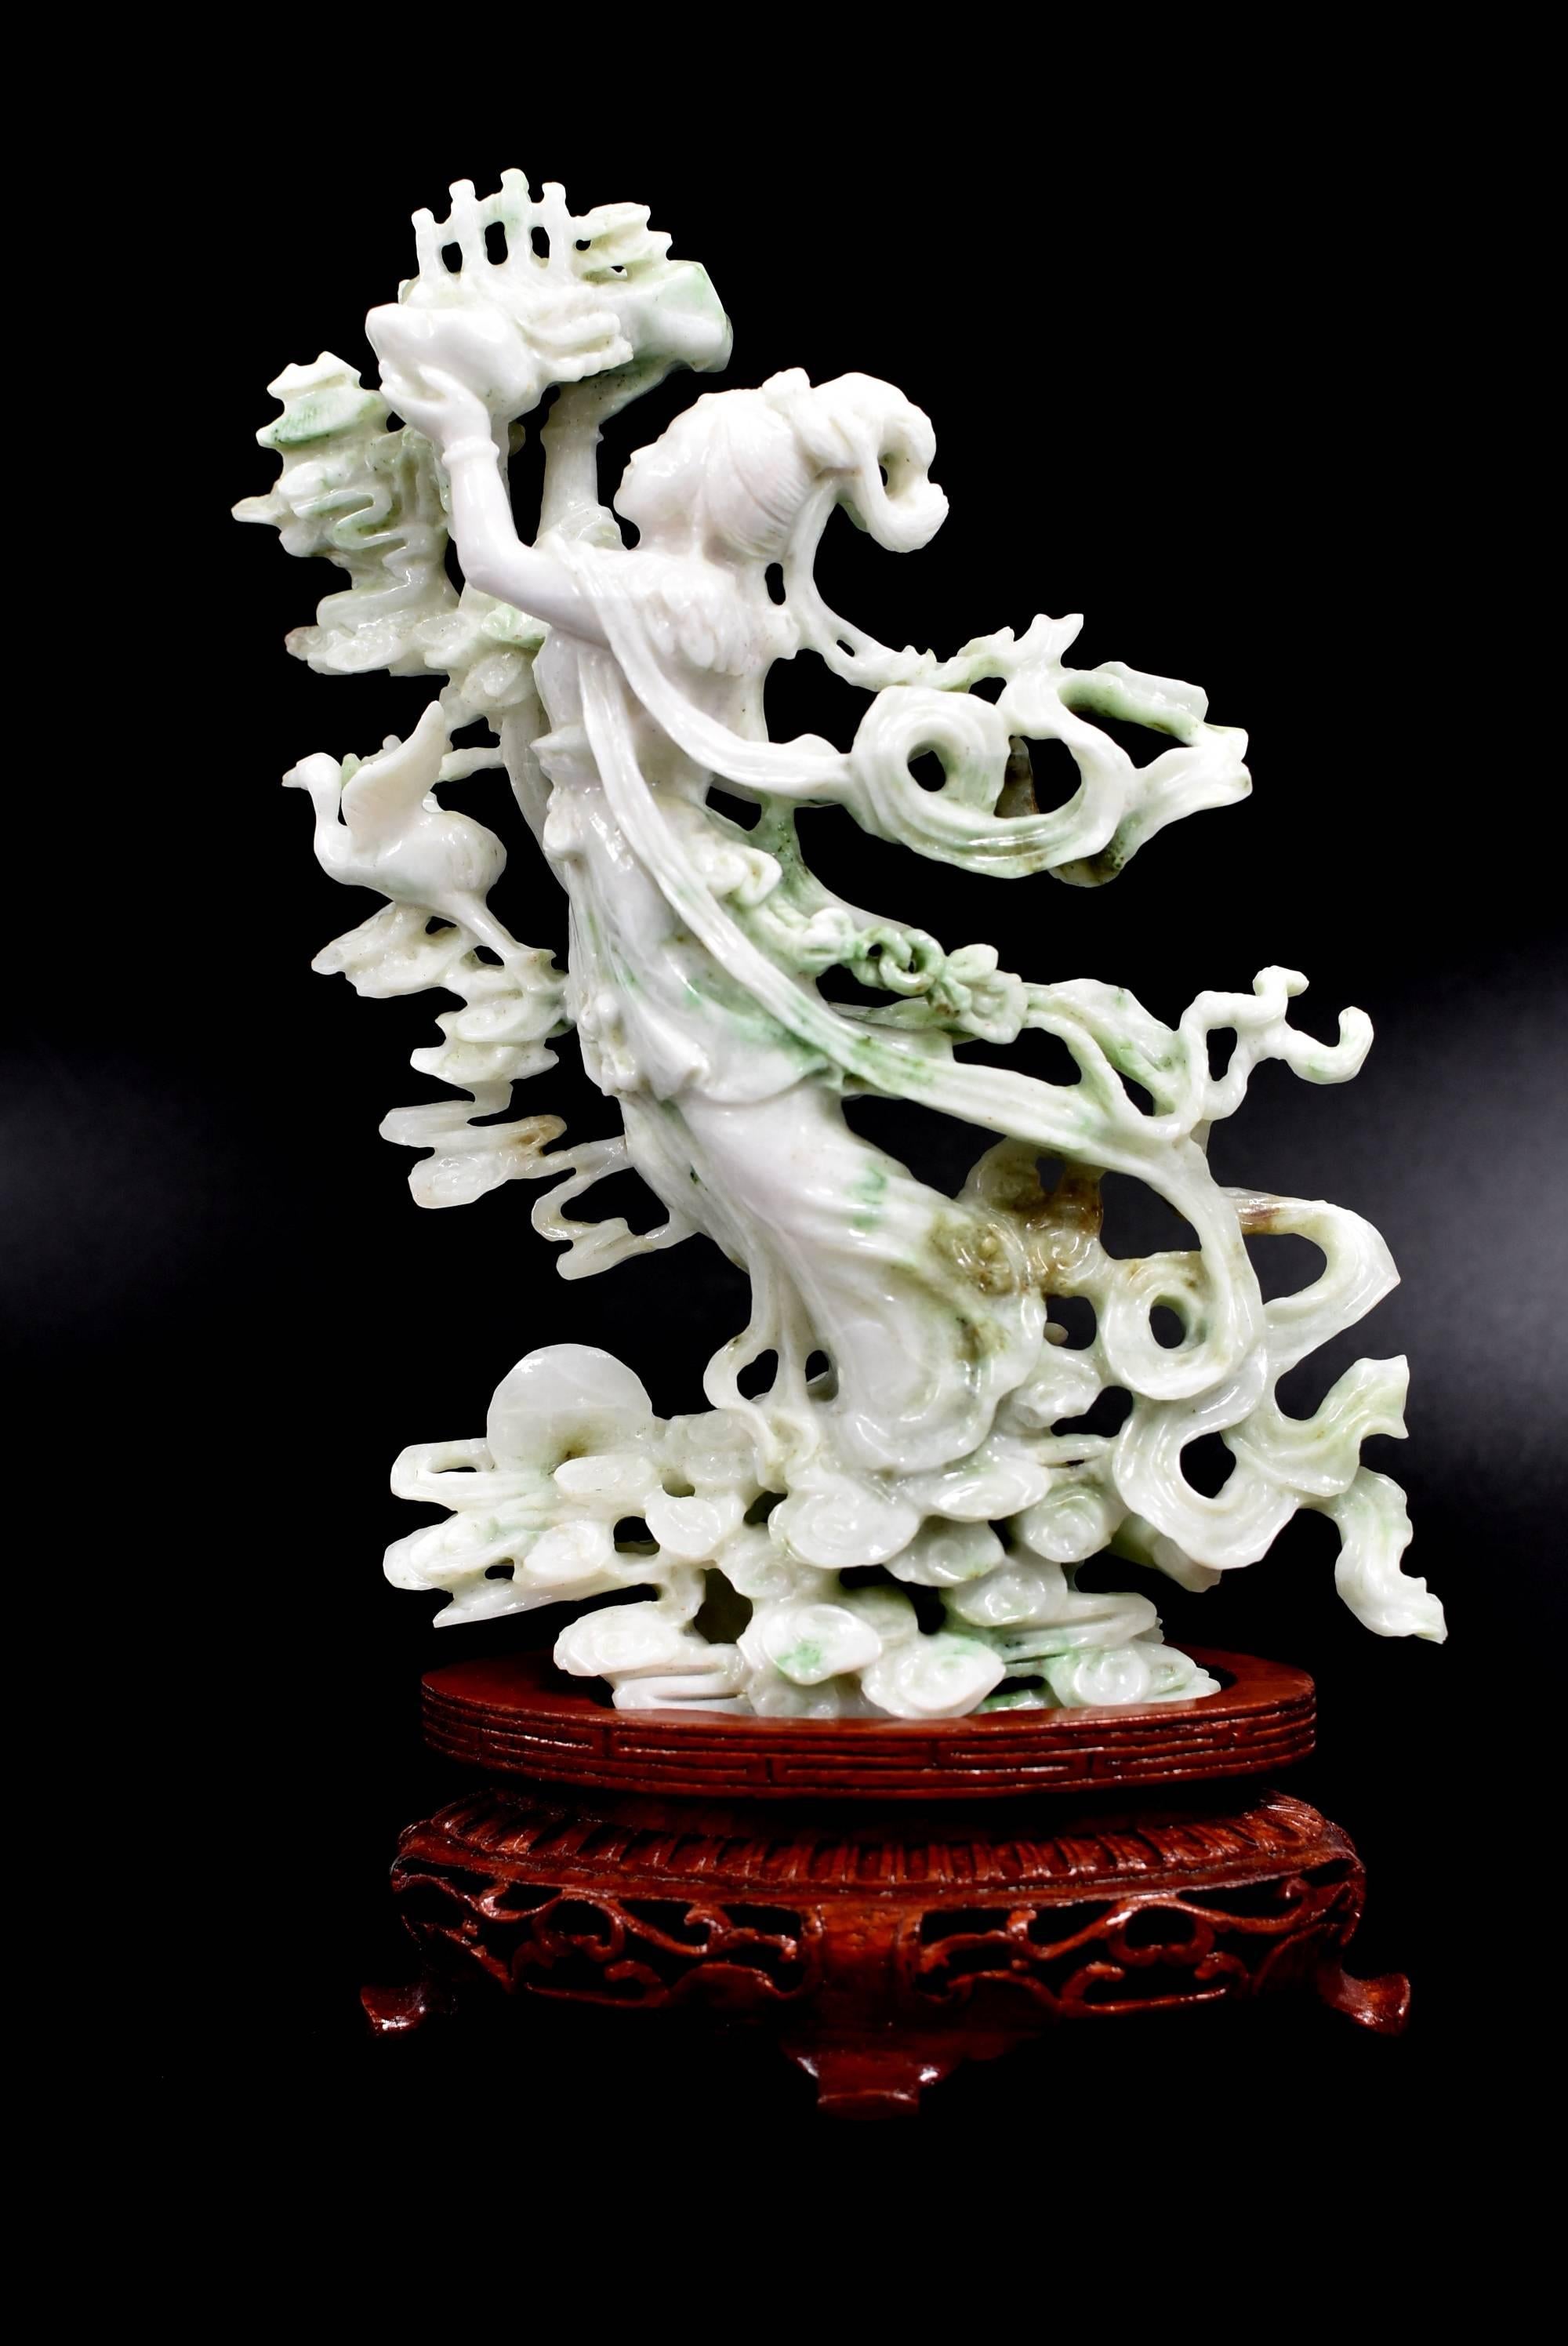 Words cannot describe how fine this wonderful piece is. The material is all natural Jadeite Jade (Lab tested and Certified), with variations of green and lavender on the mainly snow white gemstone. The carving is done by a master jade carver with